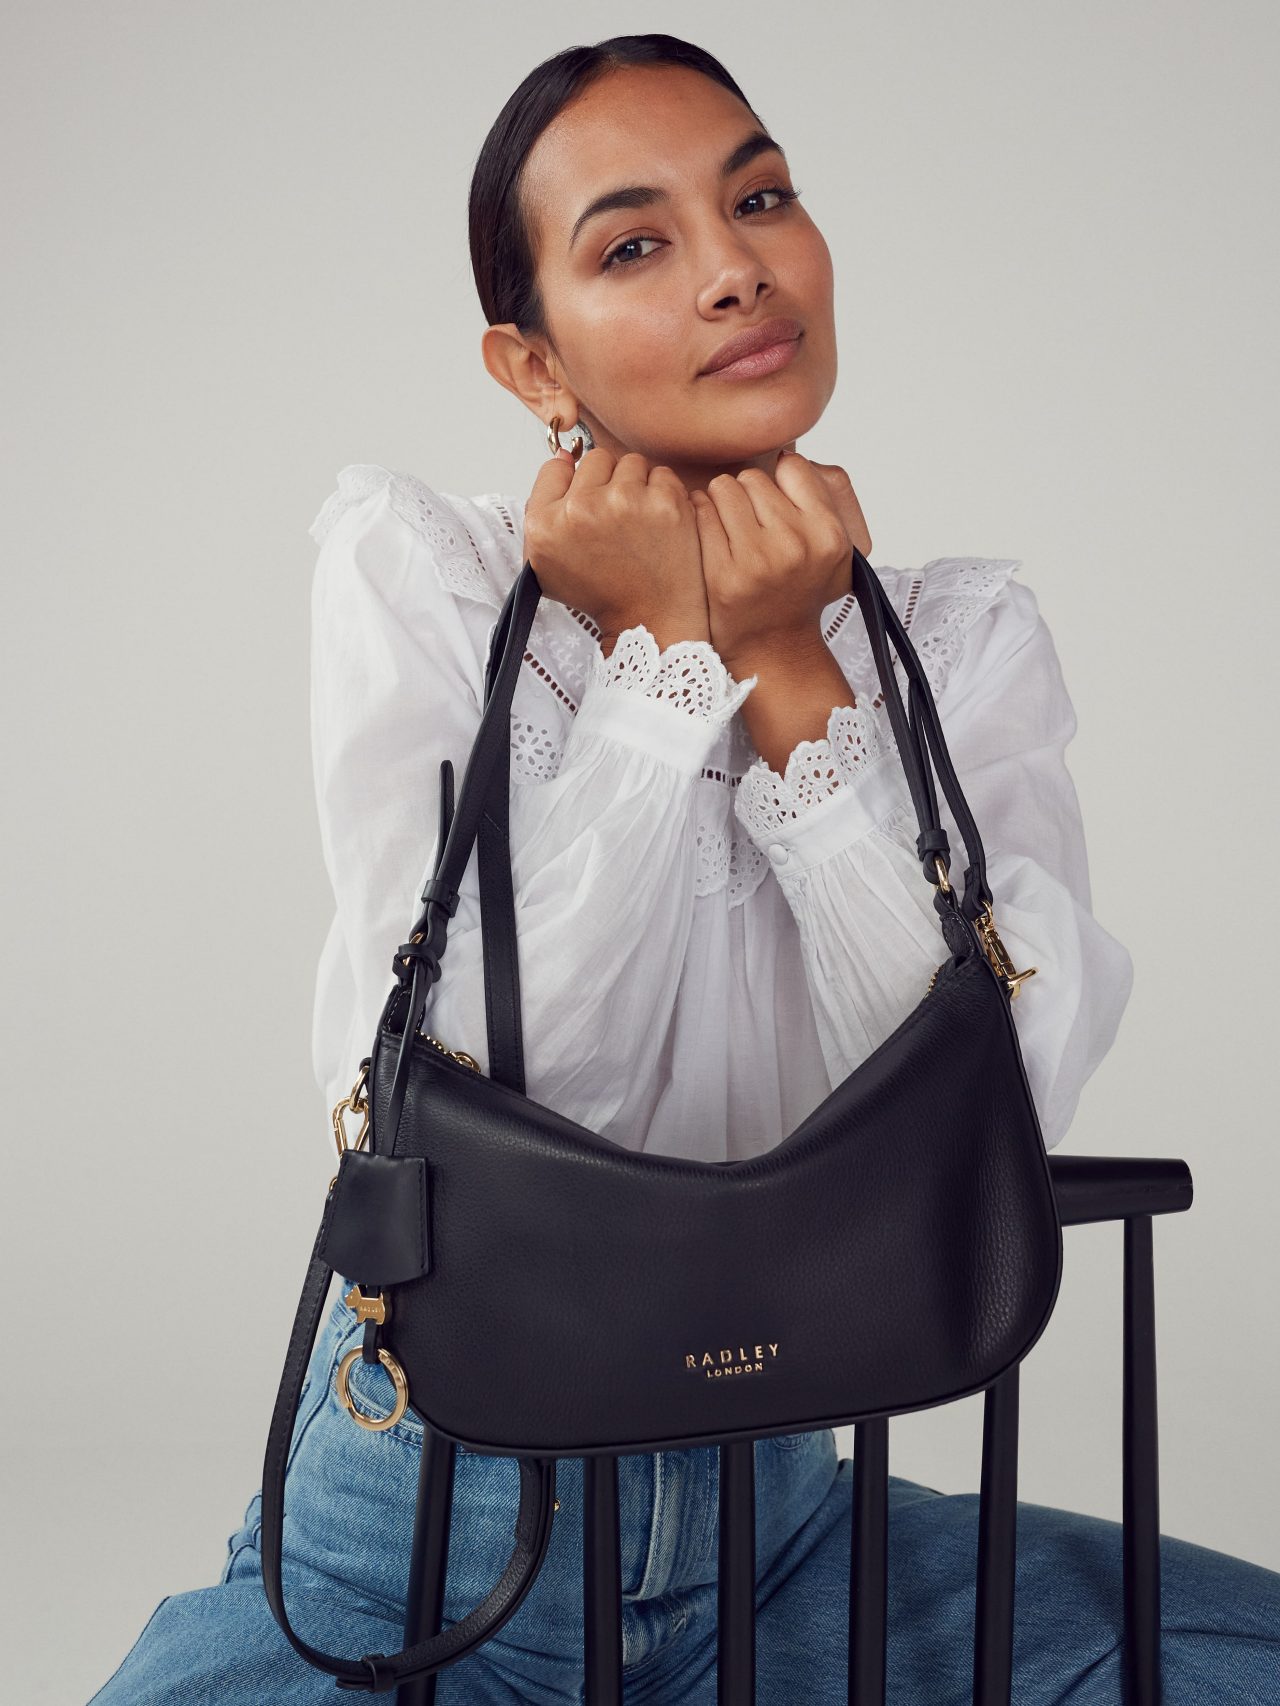 Model with Summerstown leather handbag